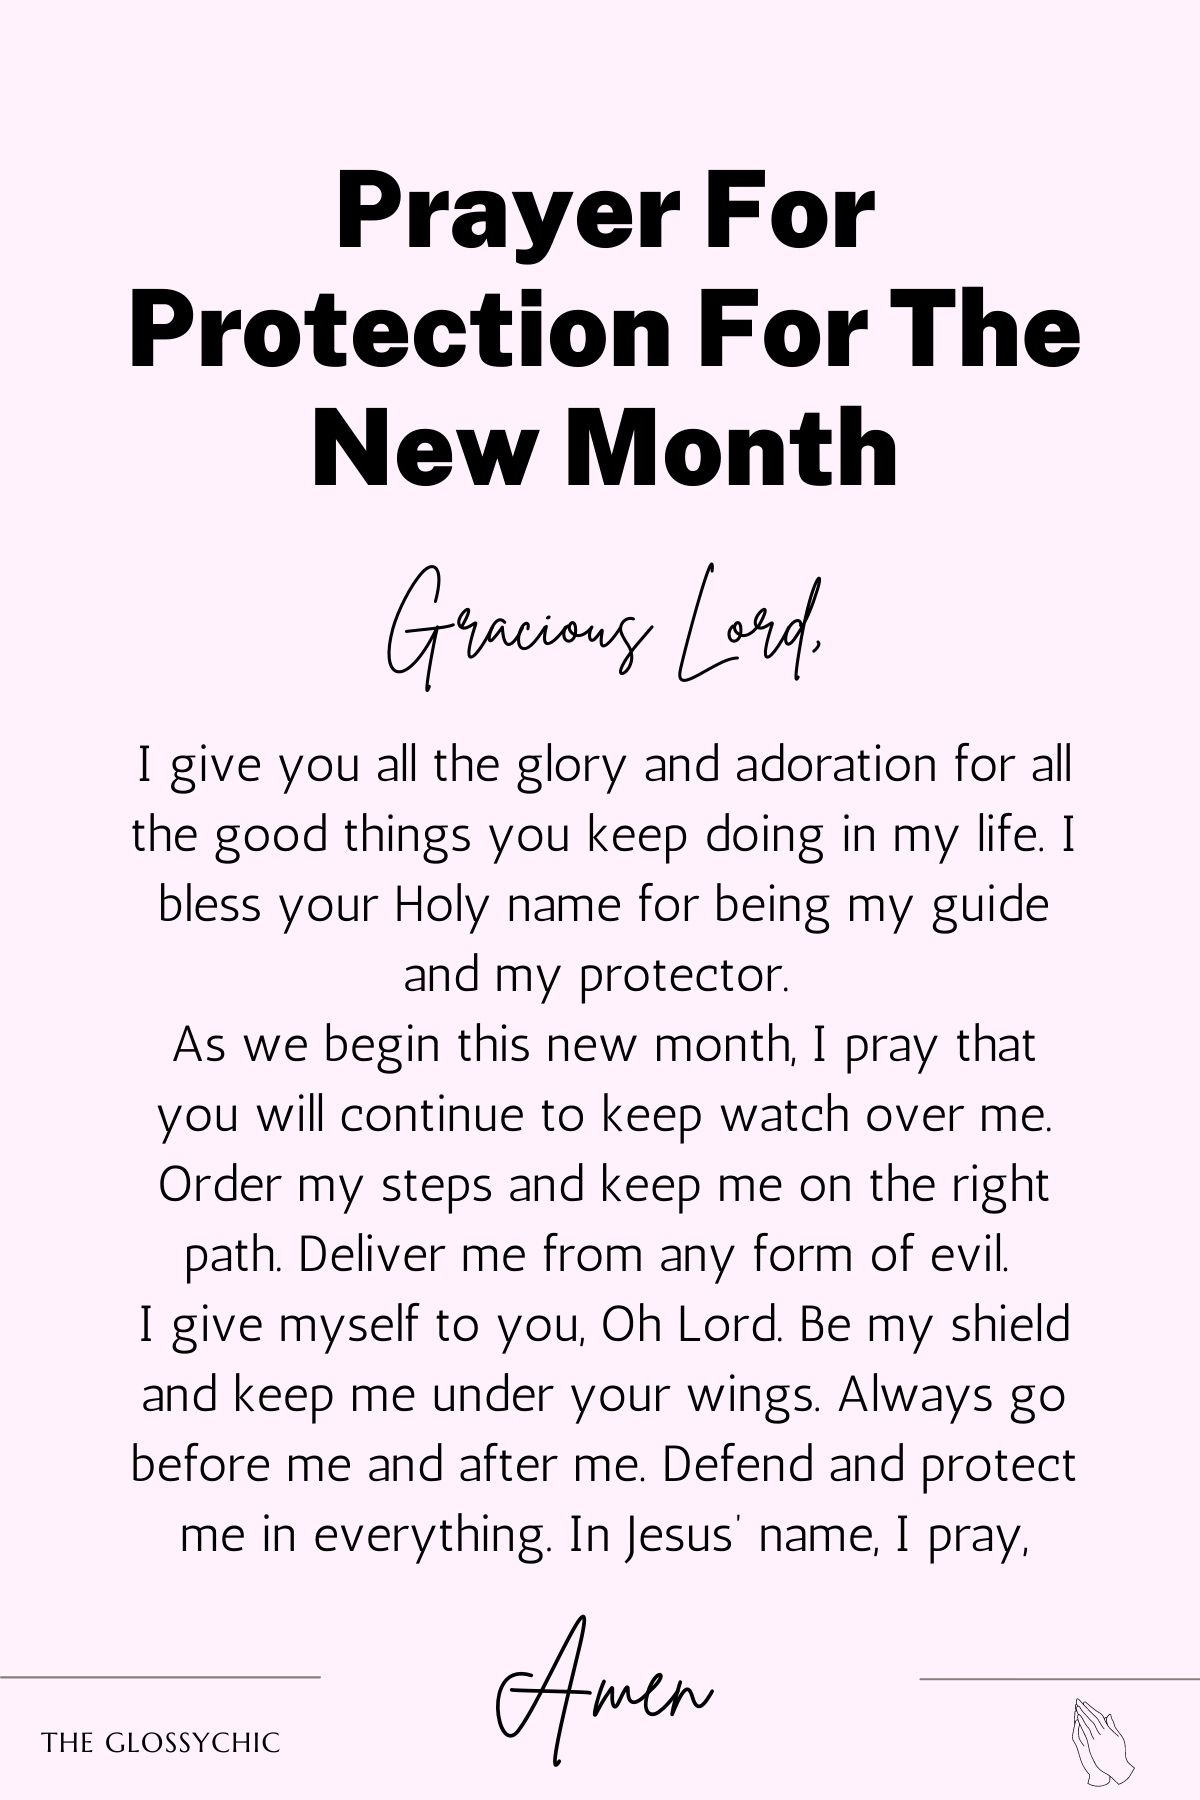 Prayer For Protection For The New Month